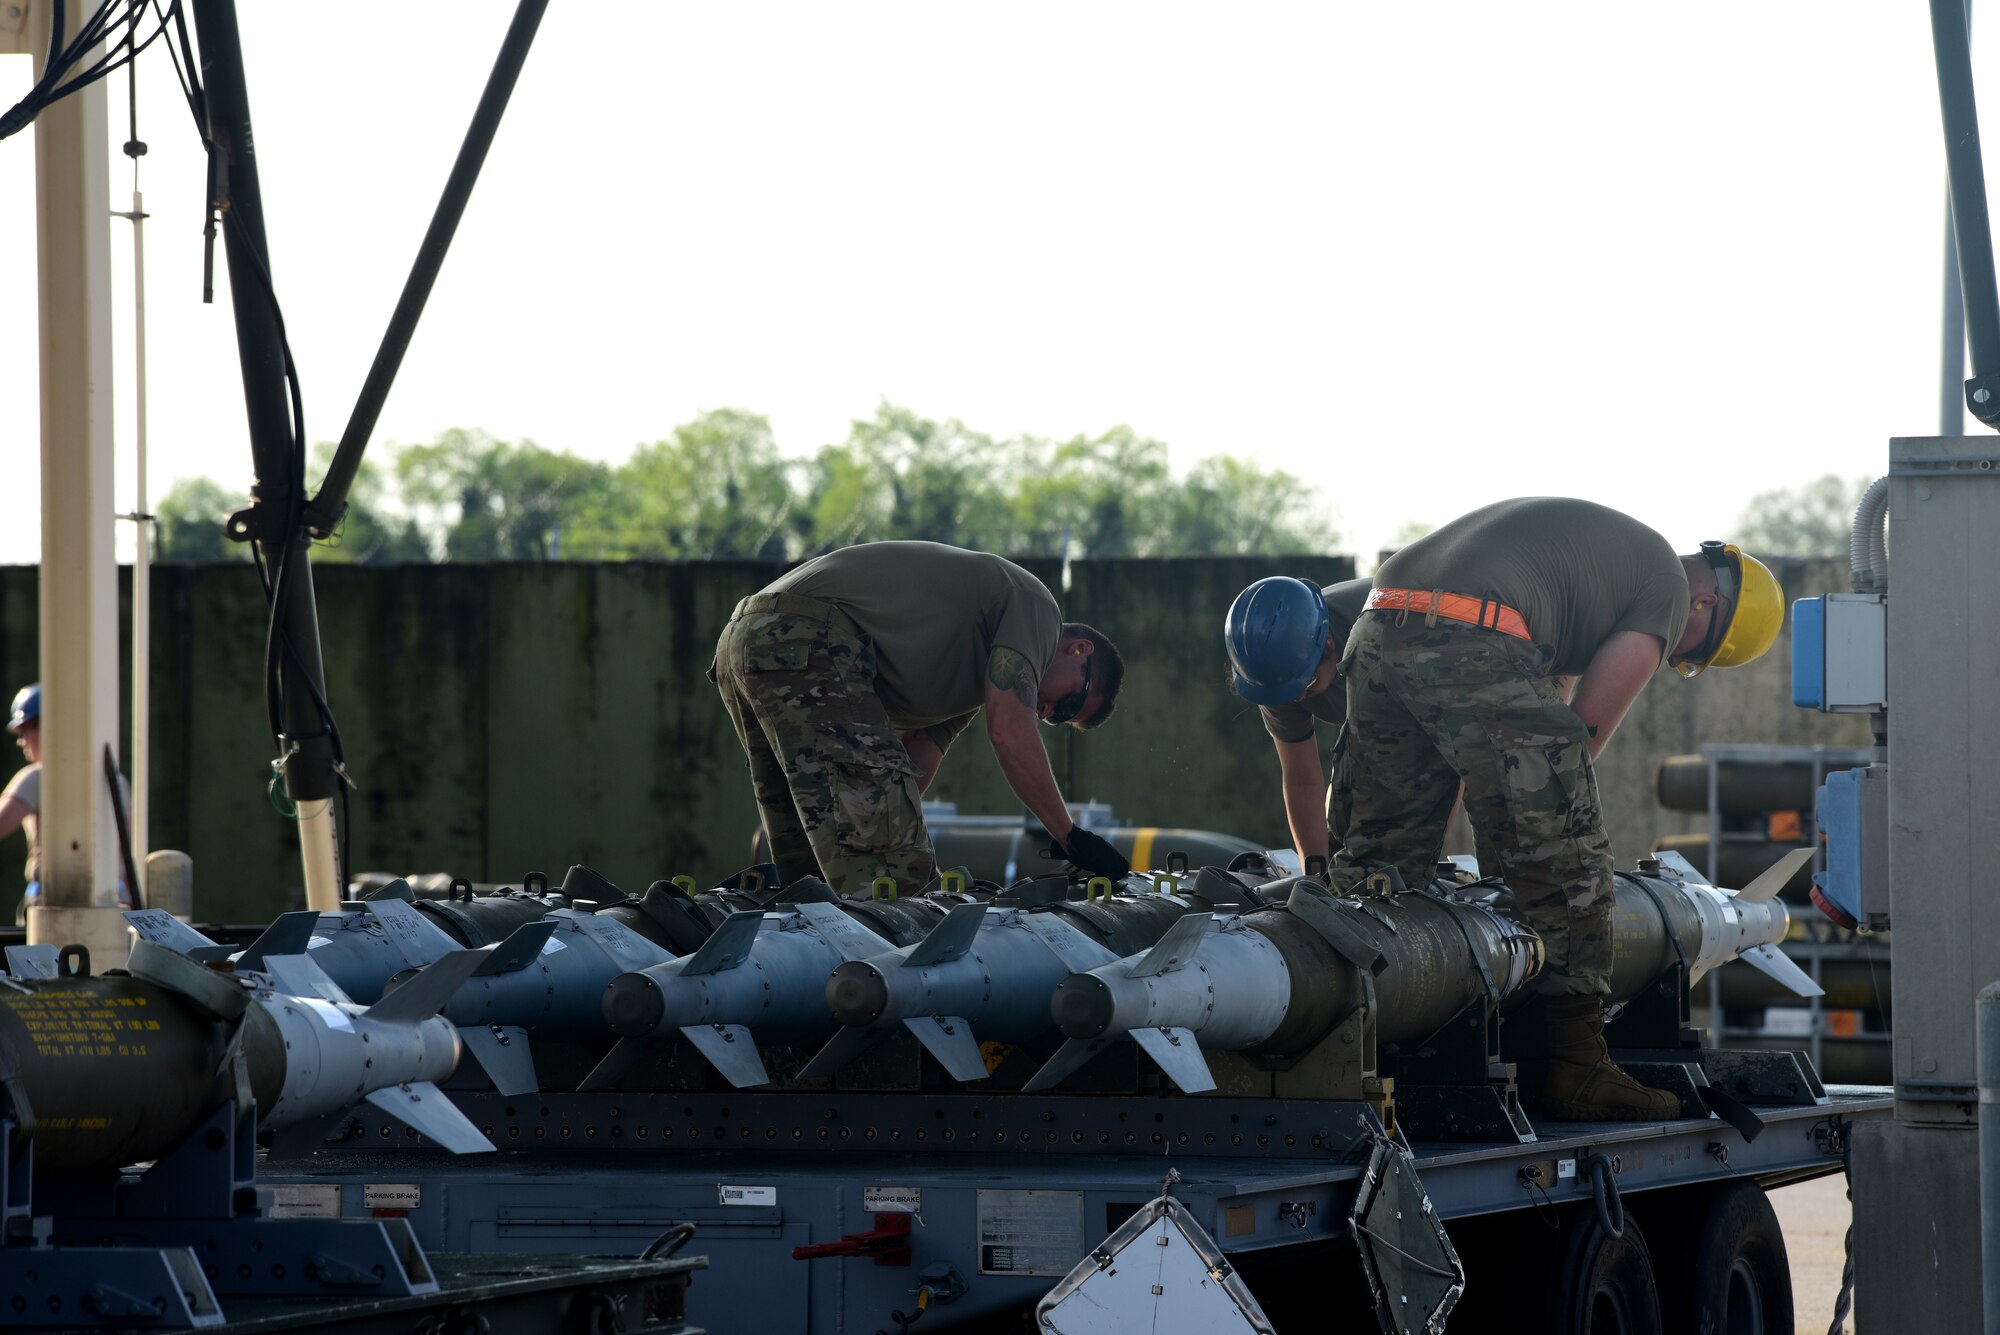 Airmen inspect munitions during Combat Ammunition Production Exercise 2019 on Aug. 7, 2019, at Aviano Air Base, Italy. Conducting exercises such as CAPEX enables Airmen to learn in a controlled environment, bolstering unit interoperability and refining their practice. (U.S. Air Force photo by Airman 1st Class Caleb House)